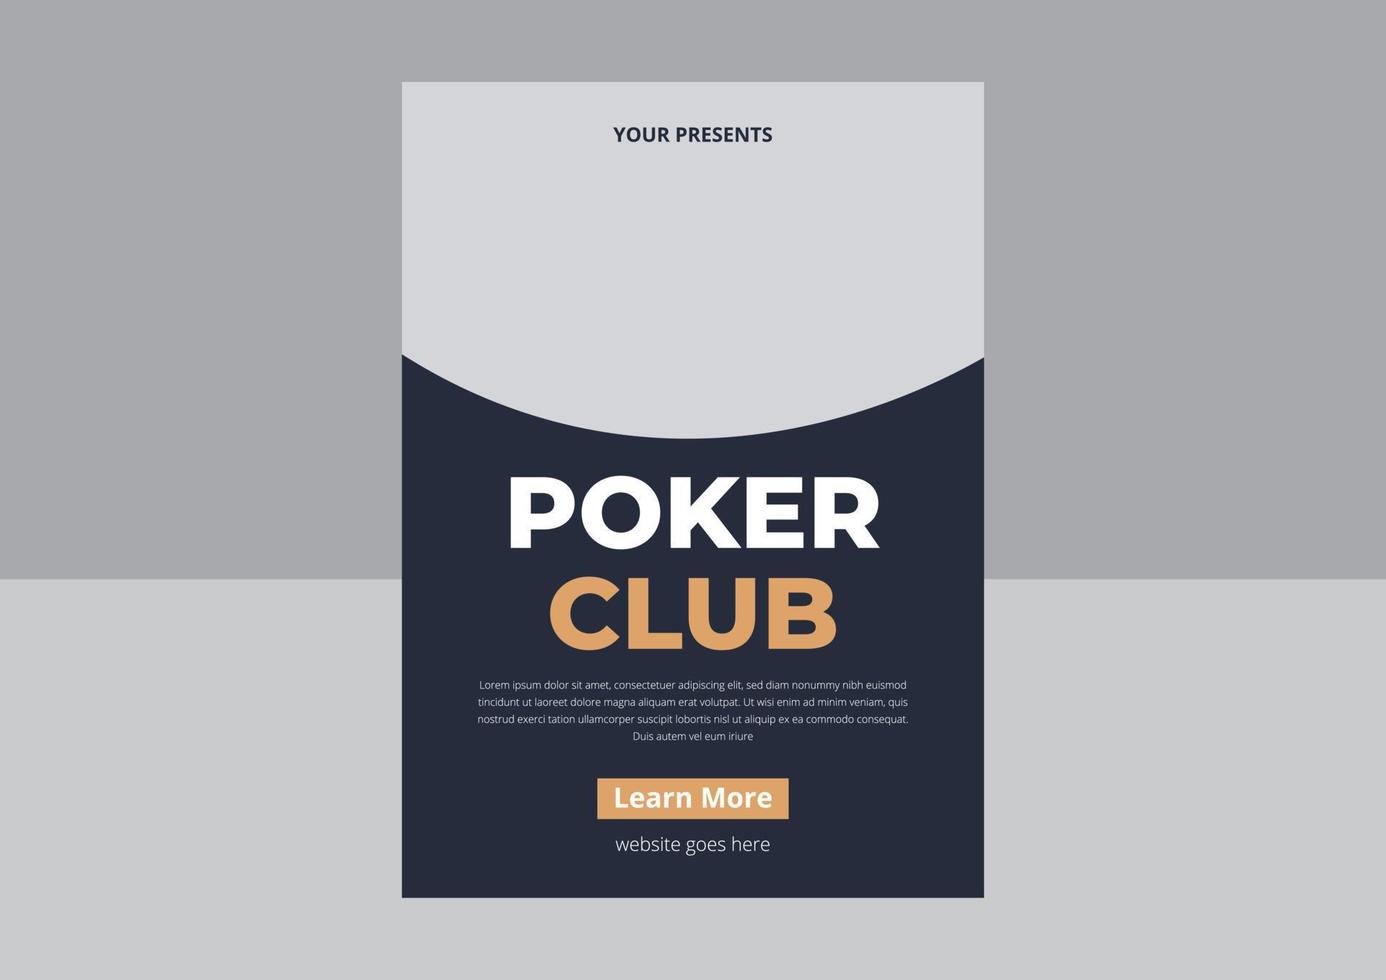 Poker Tournament Flyer Design. Casino poker tournament invitation design. Poker party a4 flyer template. Gold text with playing chips and cards. Vector Design, Flyer, Poster